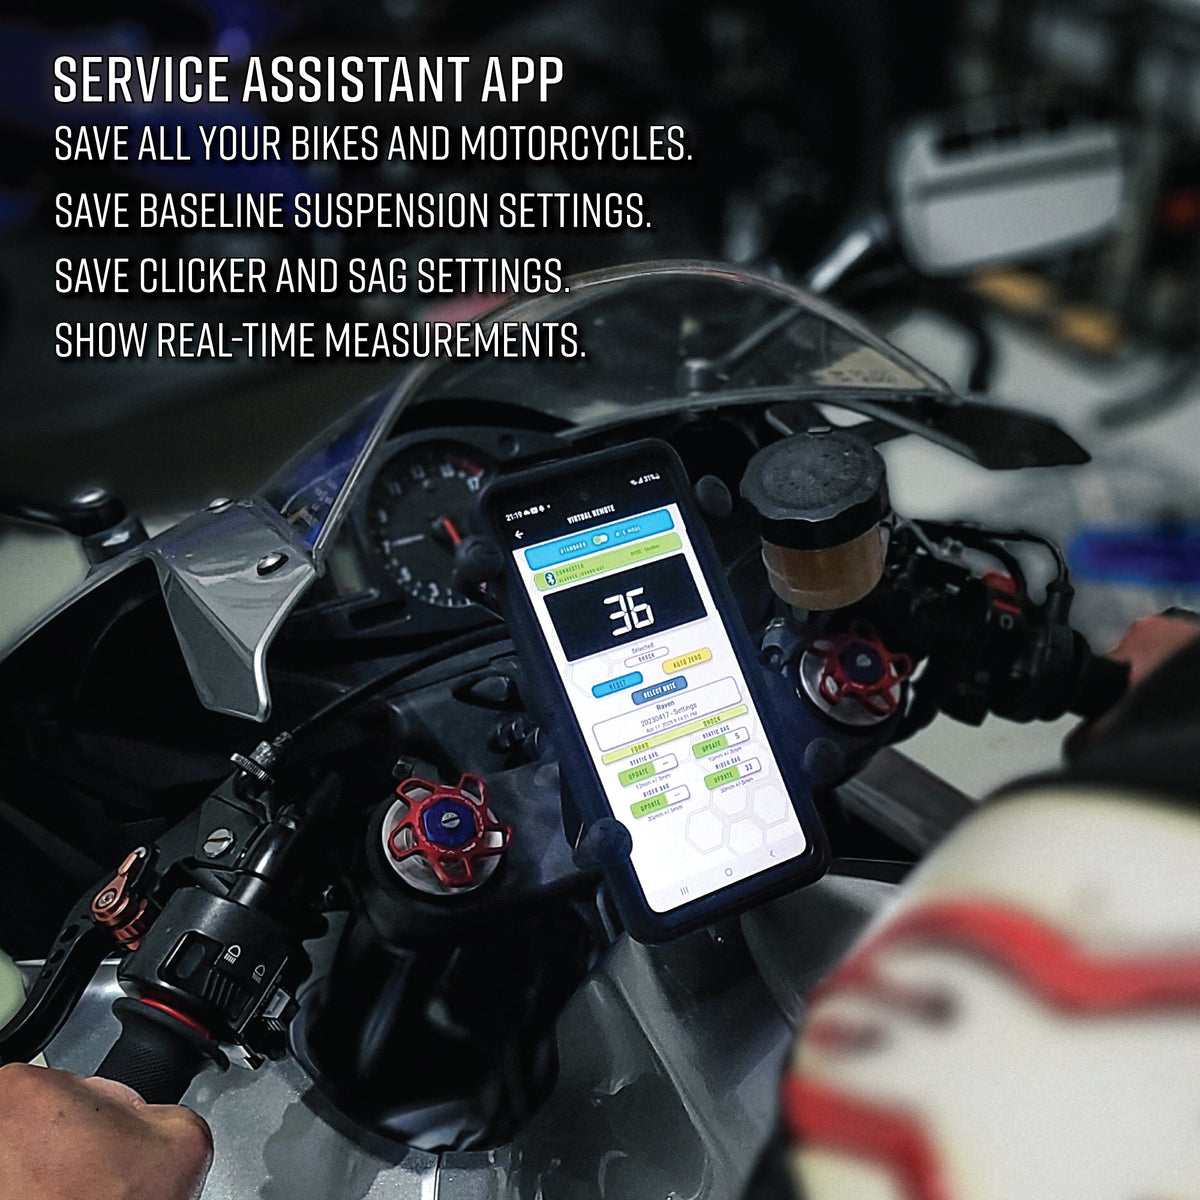 Service Assistant bike setup and maintenance smartphone app for iOS and Android.